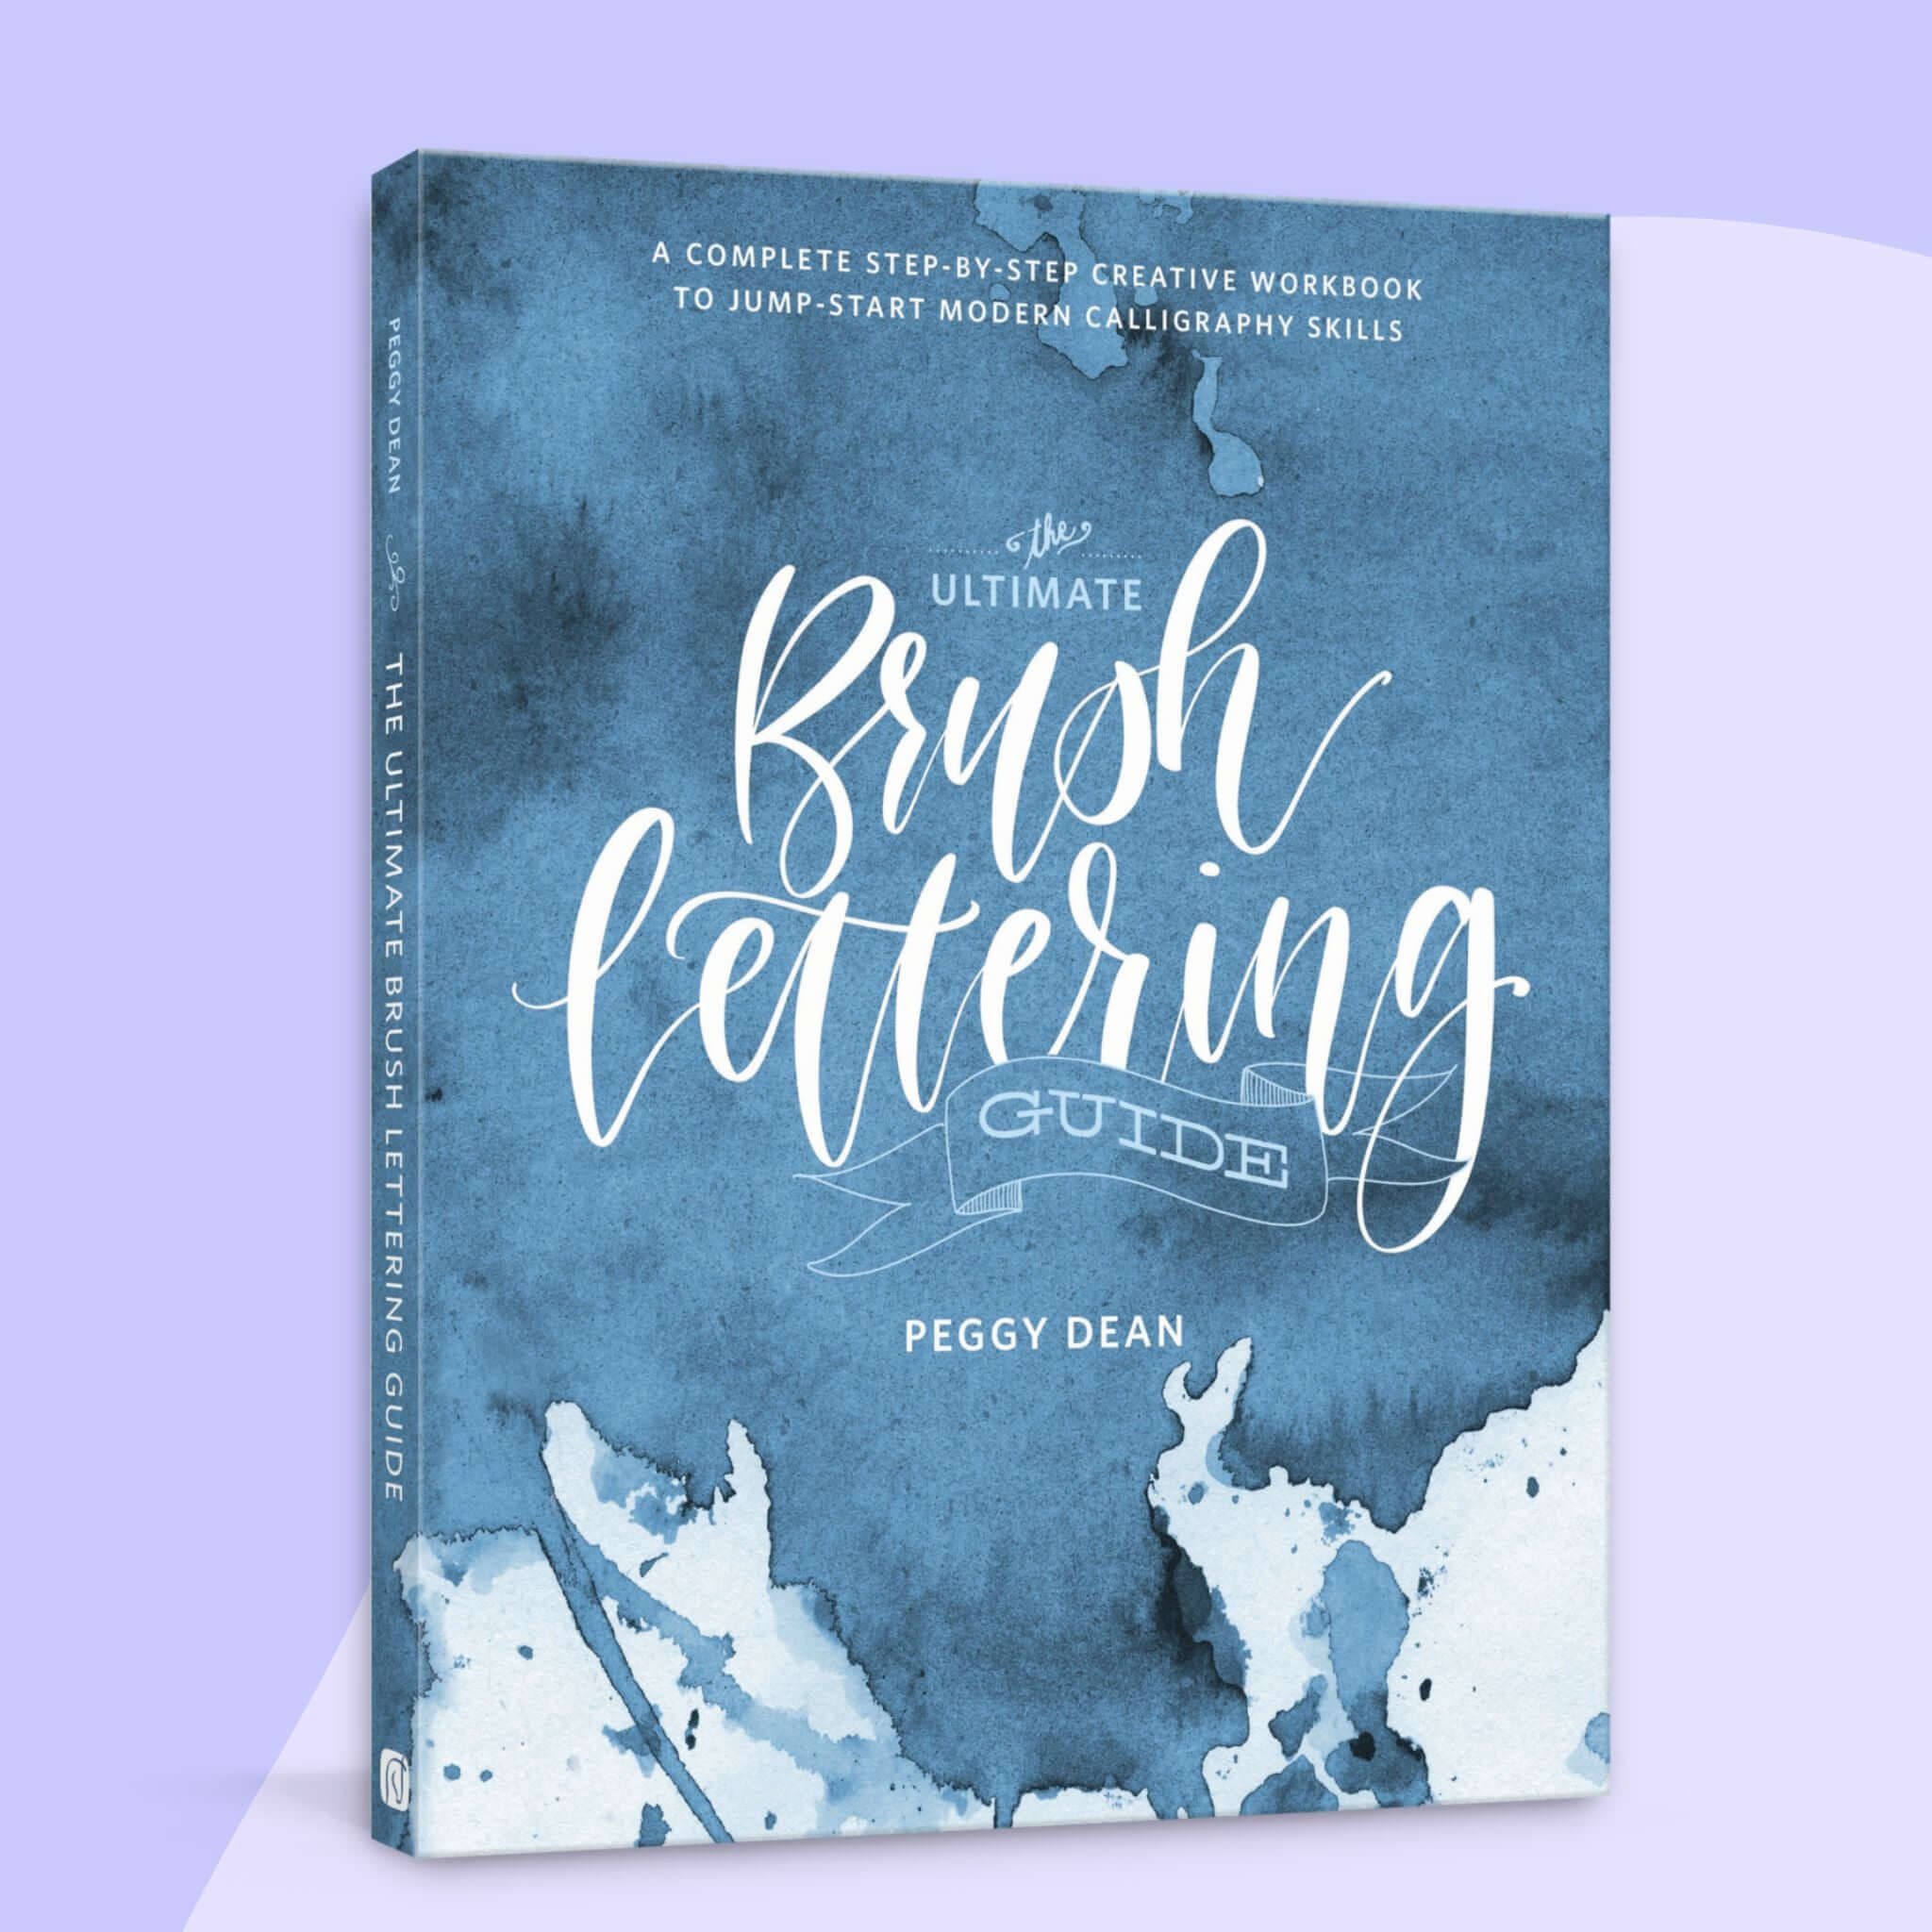 The Ultimate Brush Lettering Guide by Peggy Dean